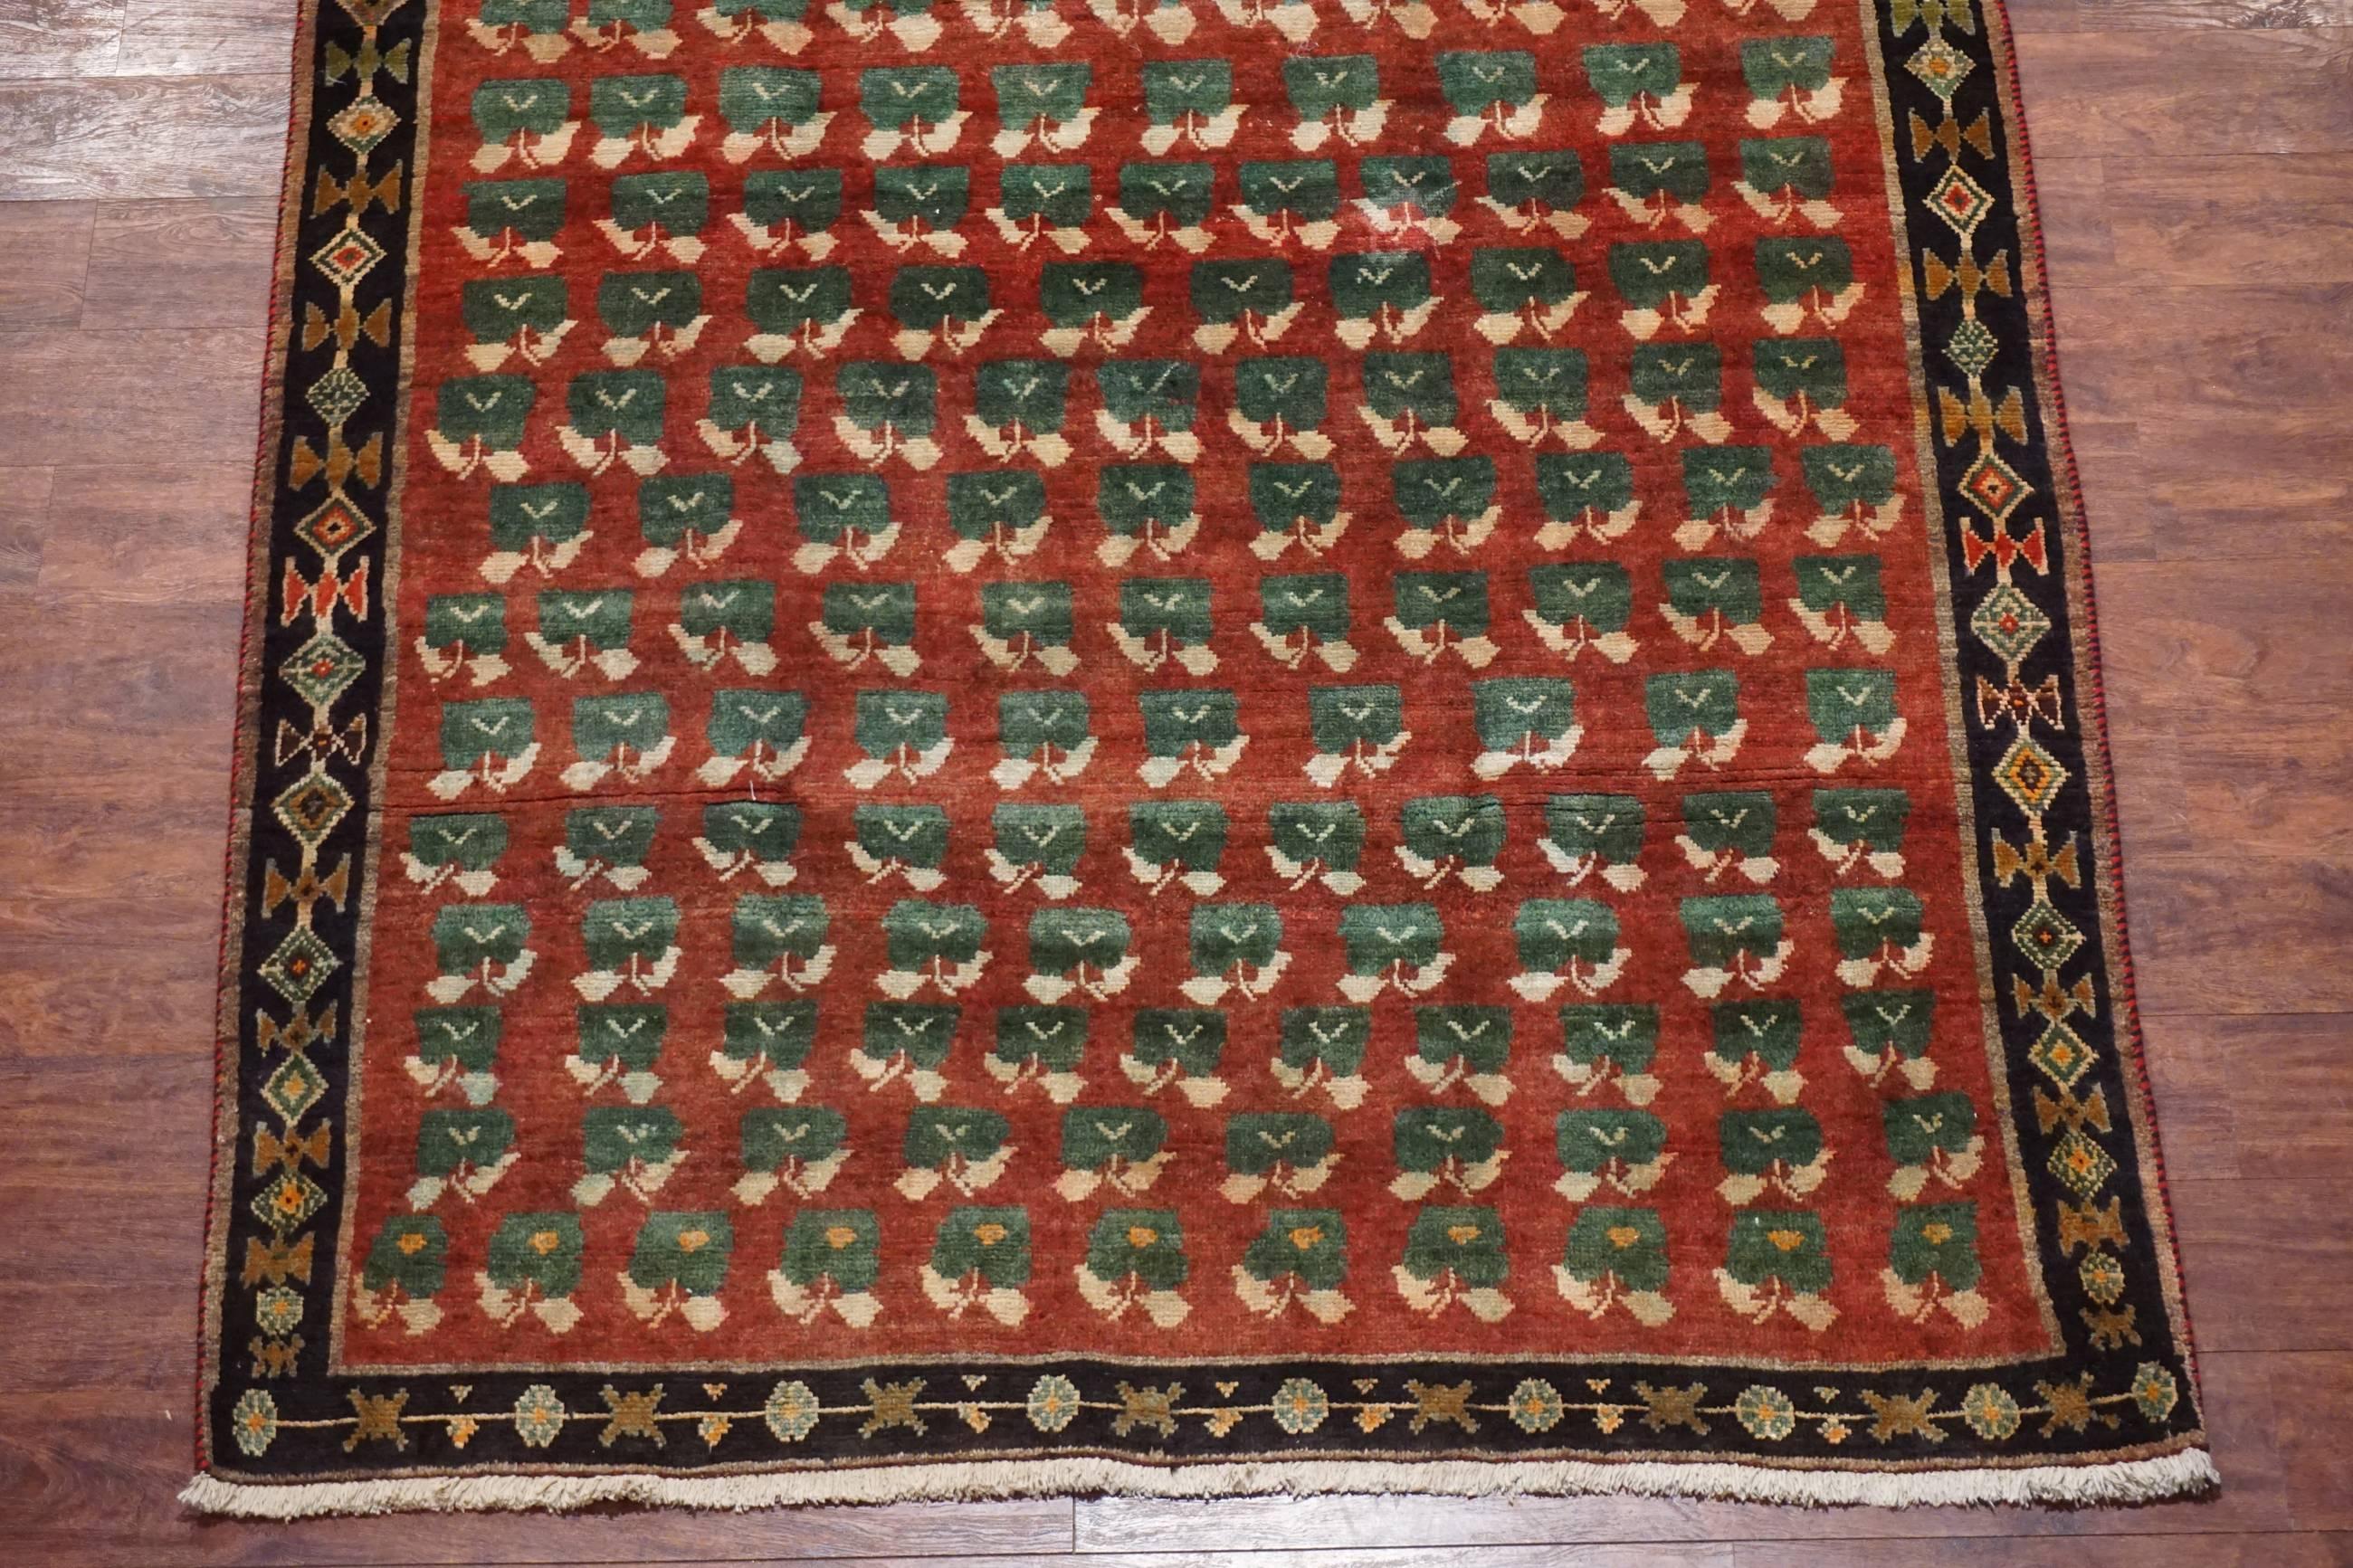 Antique Persian Tribal Rug with Flower Motif, circa 1940 In Excellent Condition For Sale In Northridge, CA